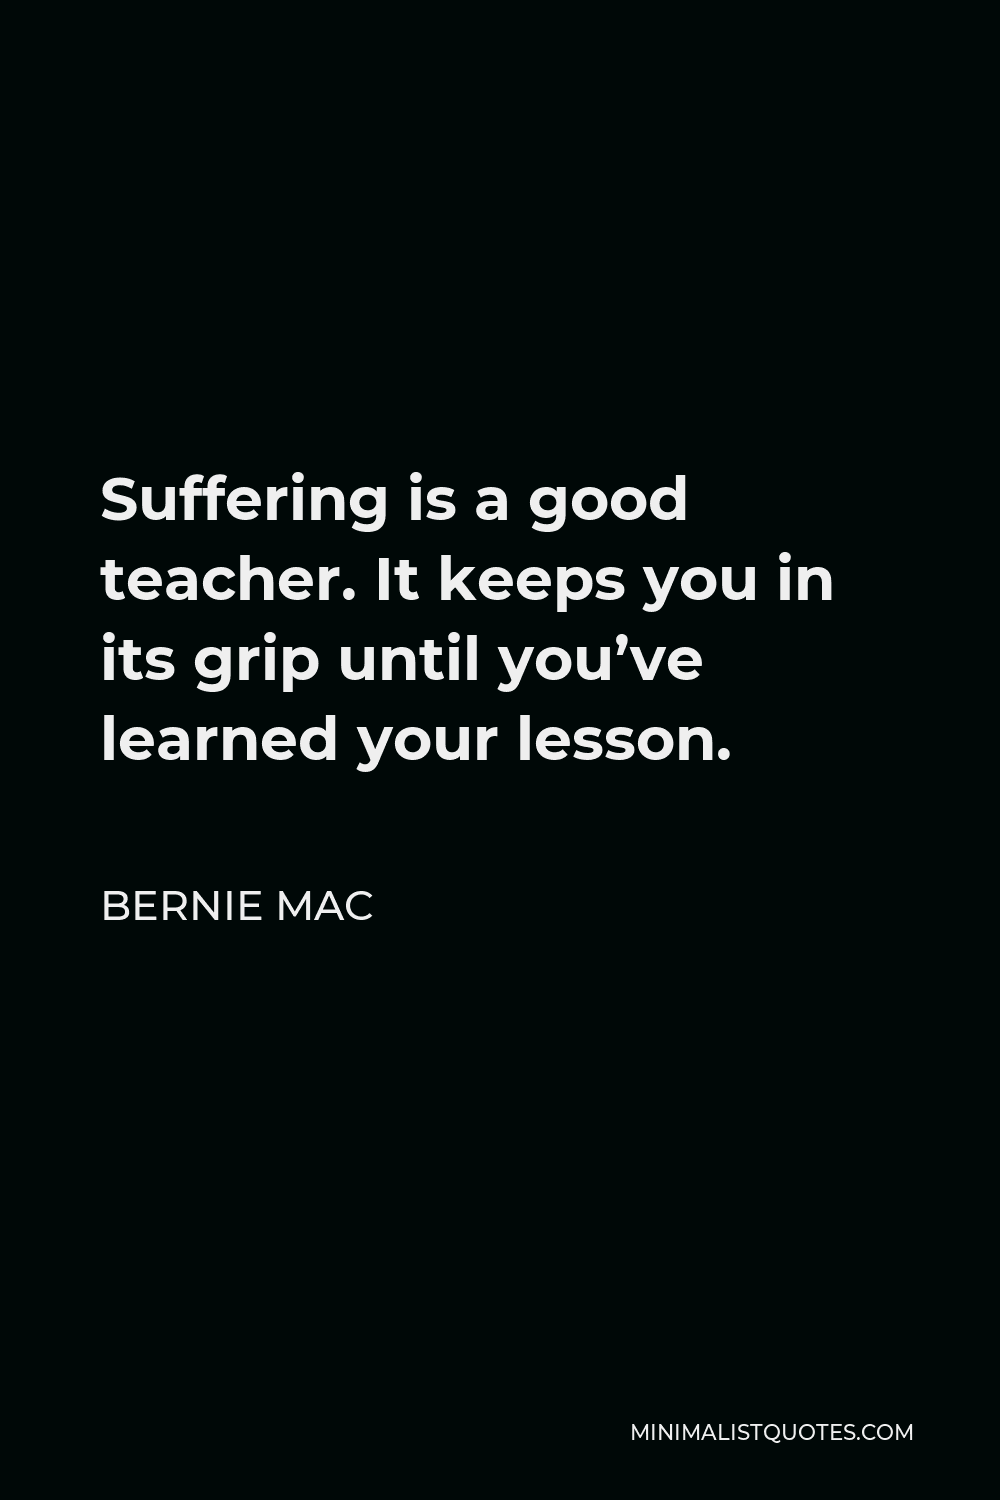 Bernie Mac Quote - Suffering is a good teacher. It keeps you in its grip until you’ve learned your lesson.